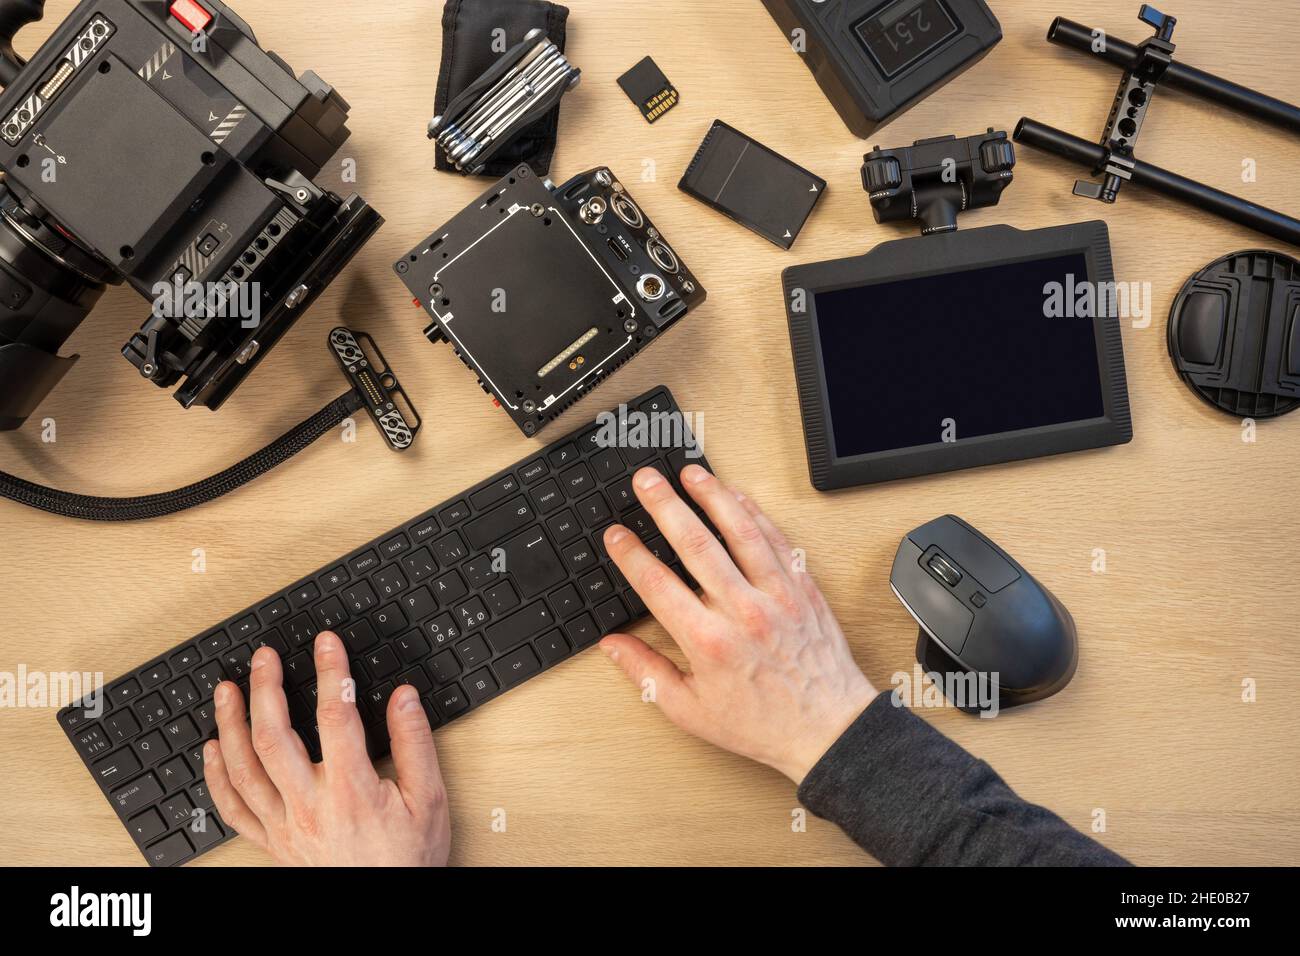 Creative photographer using computer keyboard by filming equipment at table Stock Photo